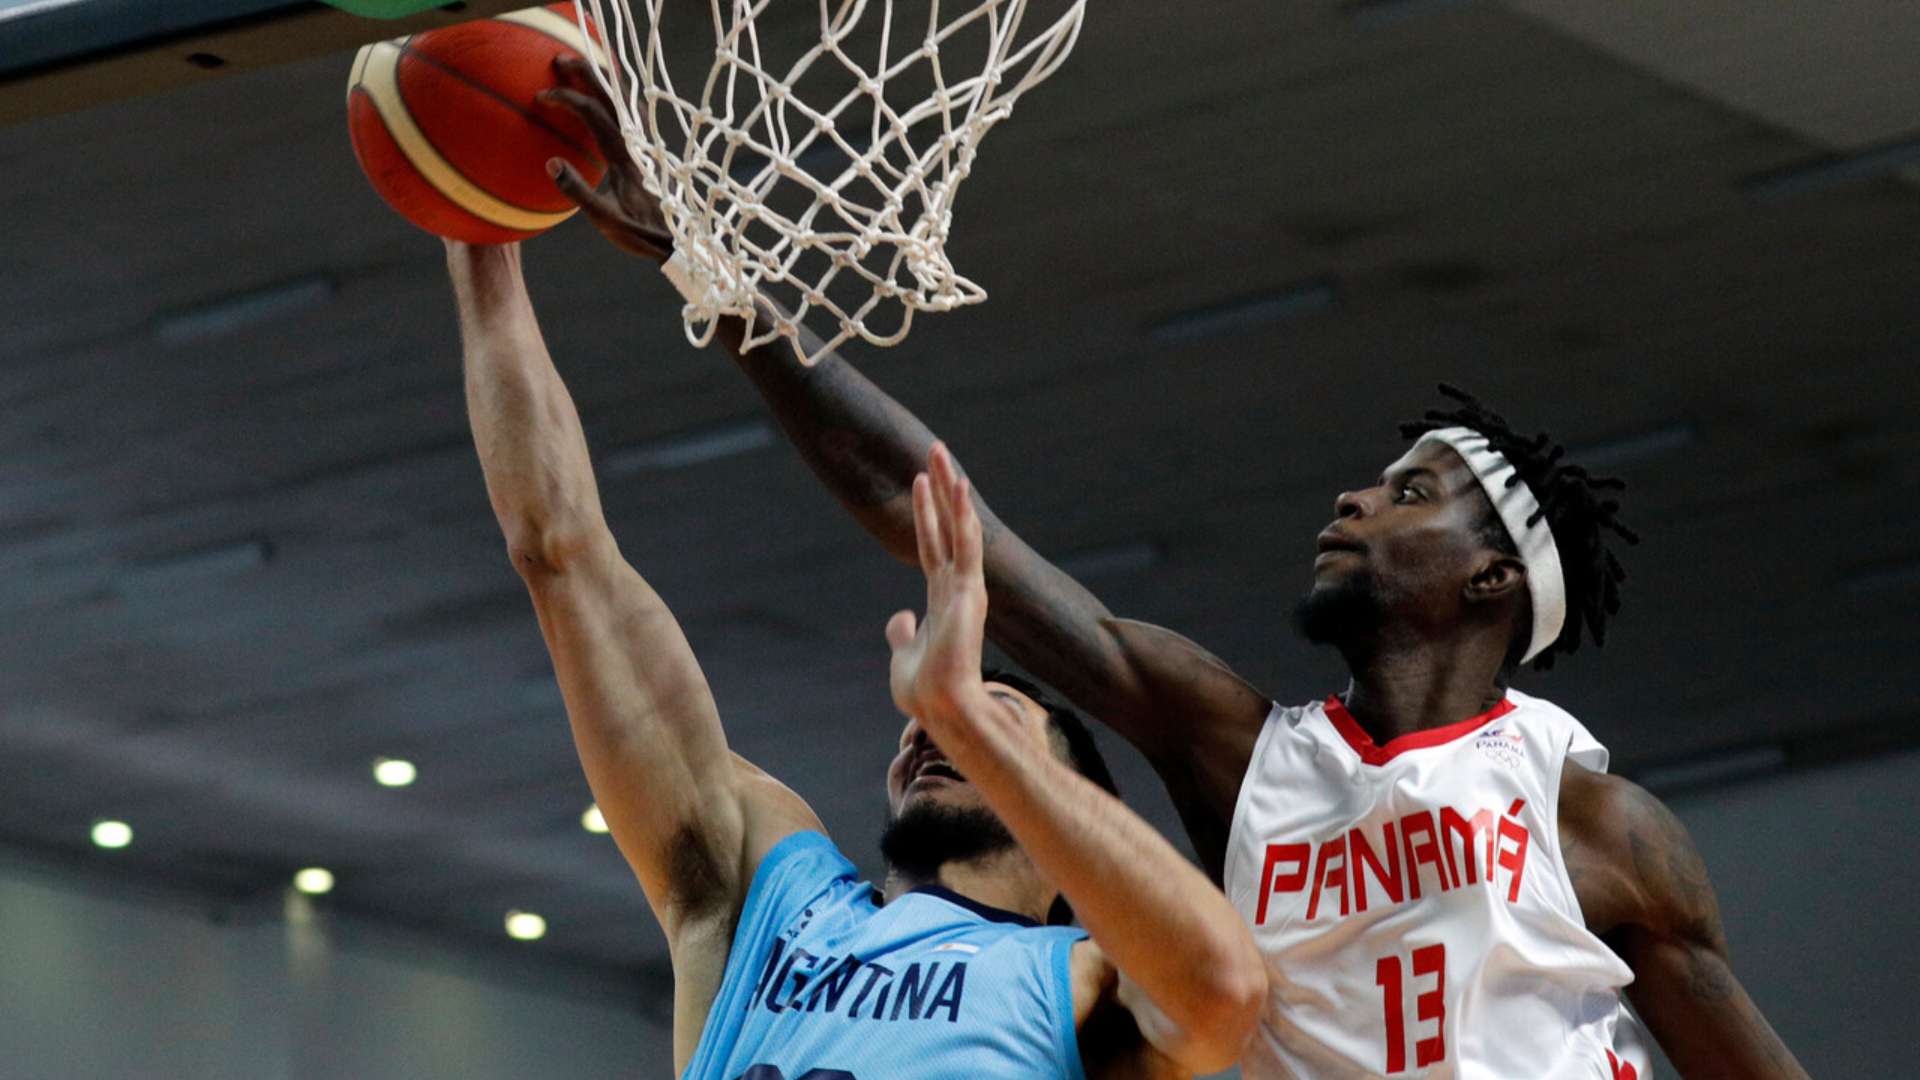 Male Basketball: Argentina Defeats Panama and Solidifies Their Position in Group